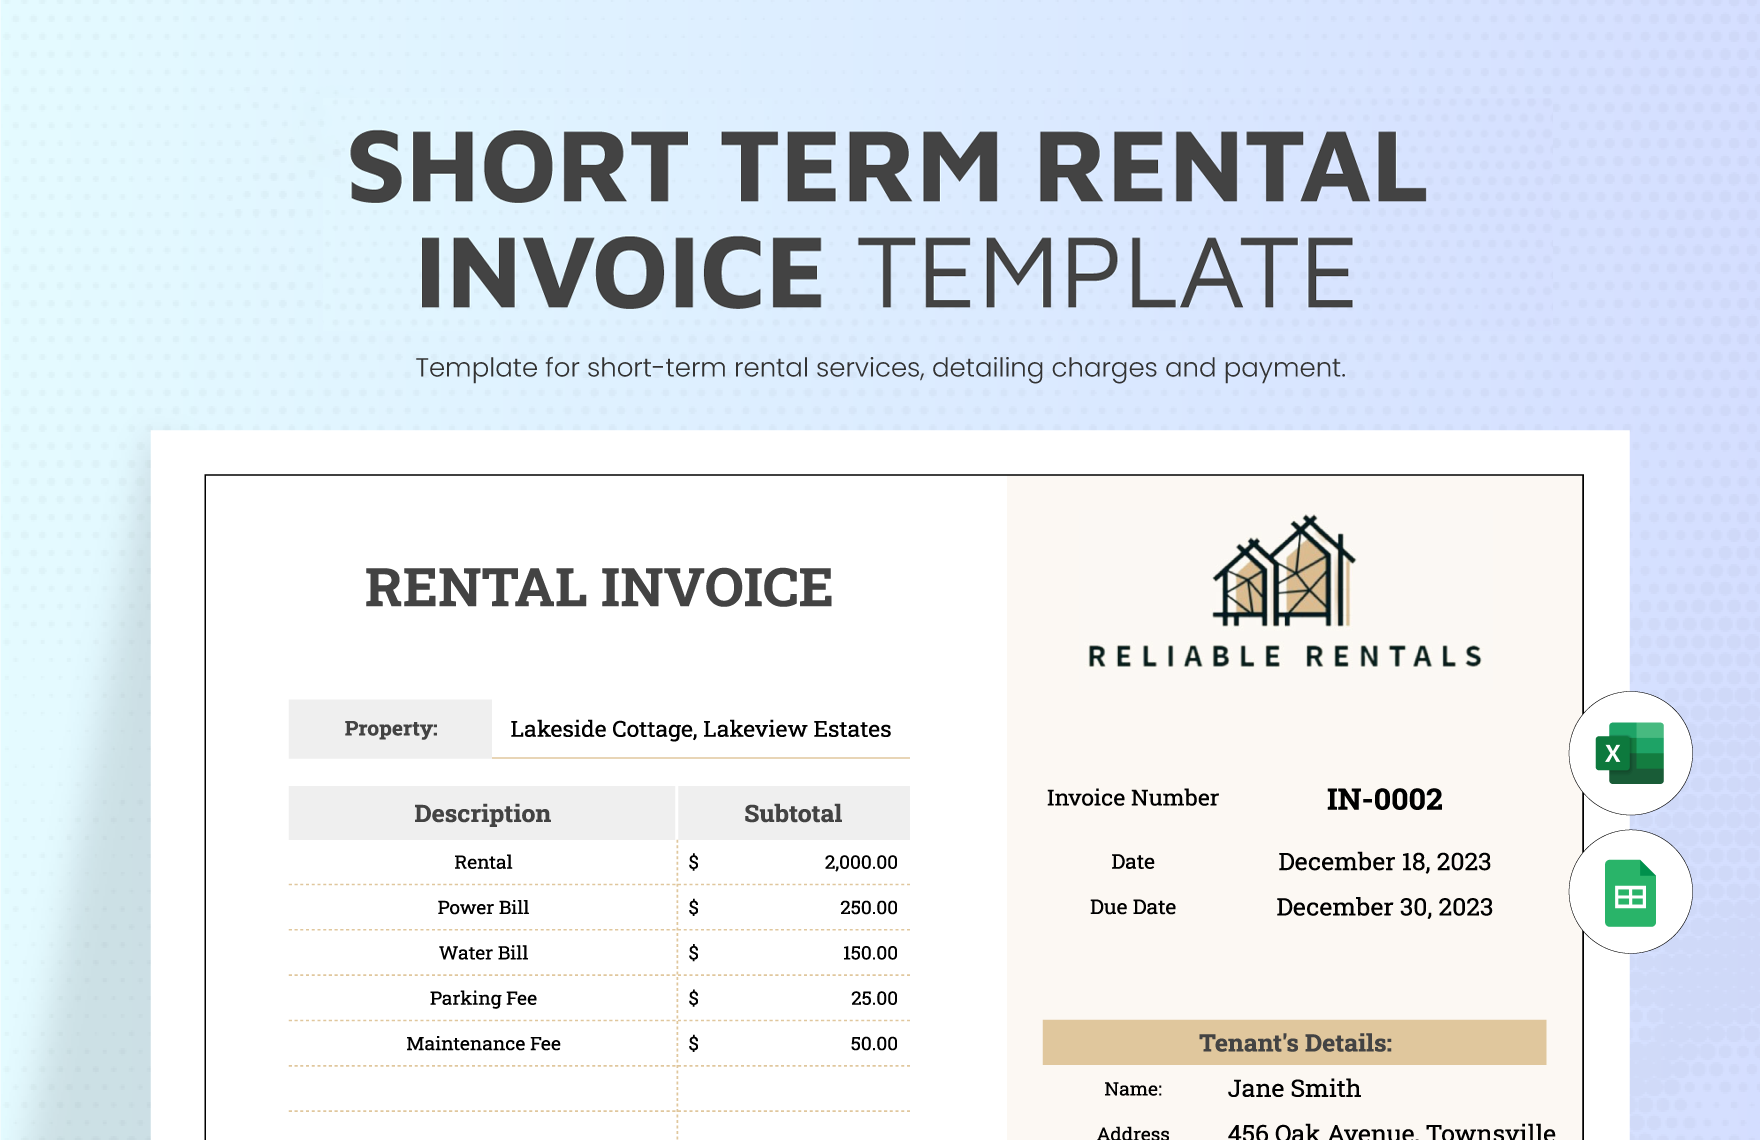 Short Term Rental Invoice Template in Excel, Google Sheets